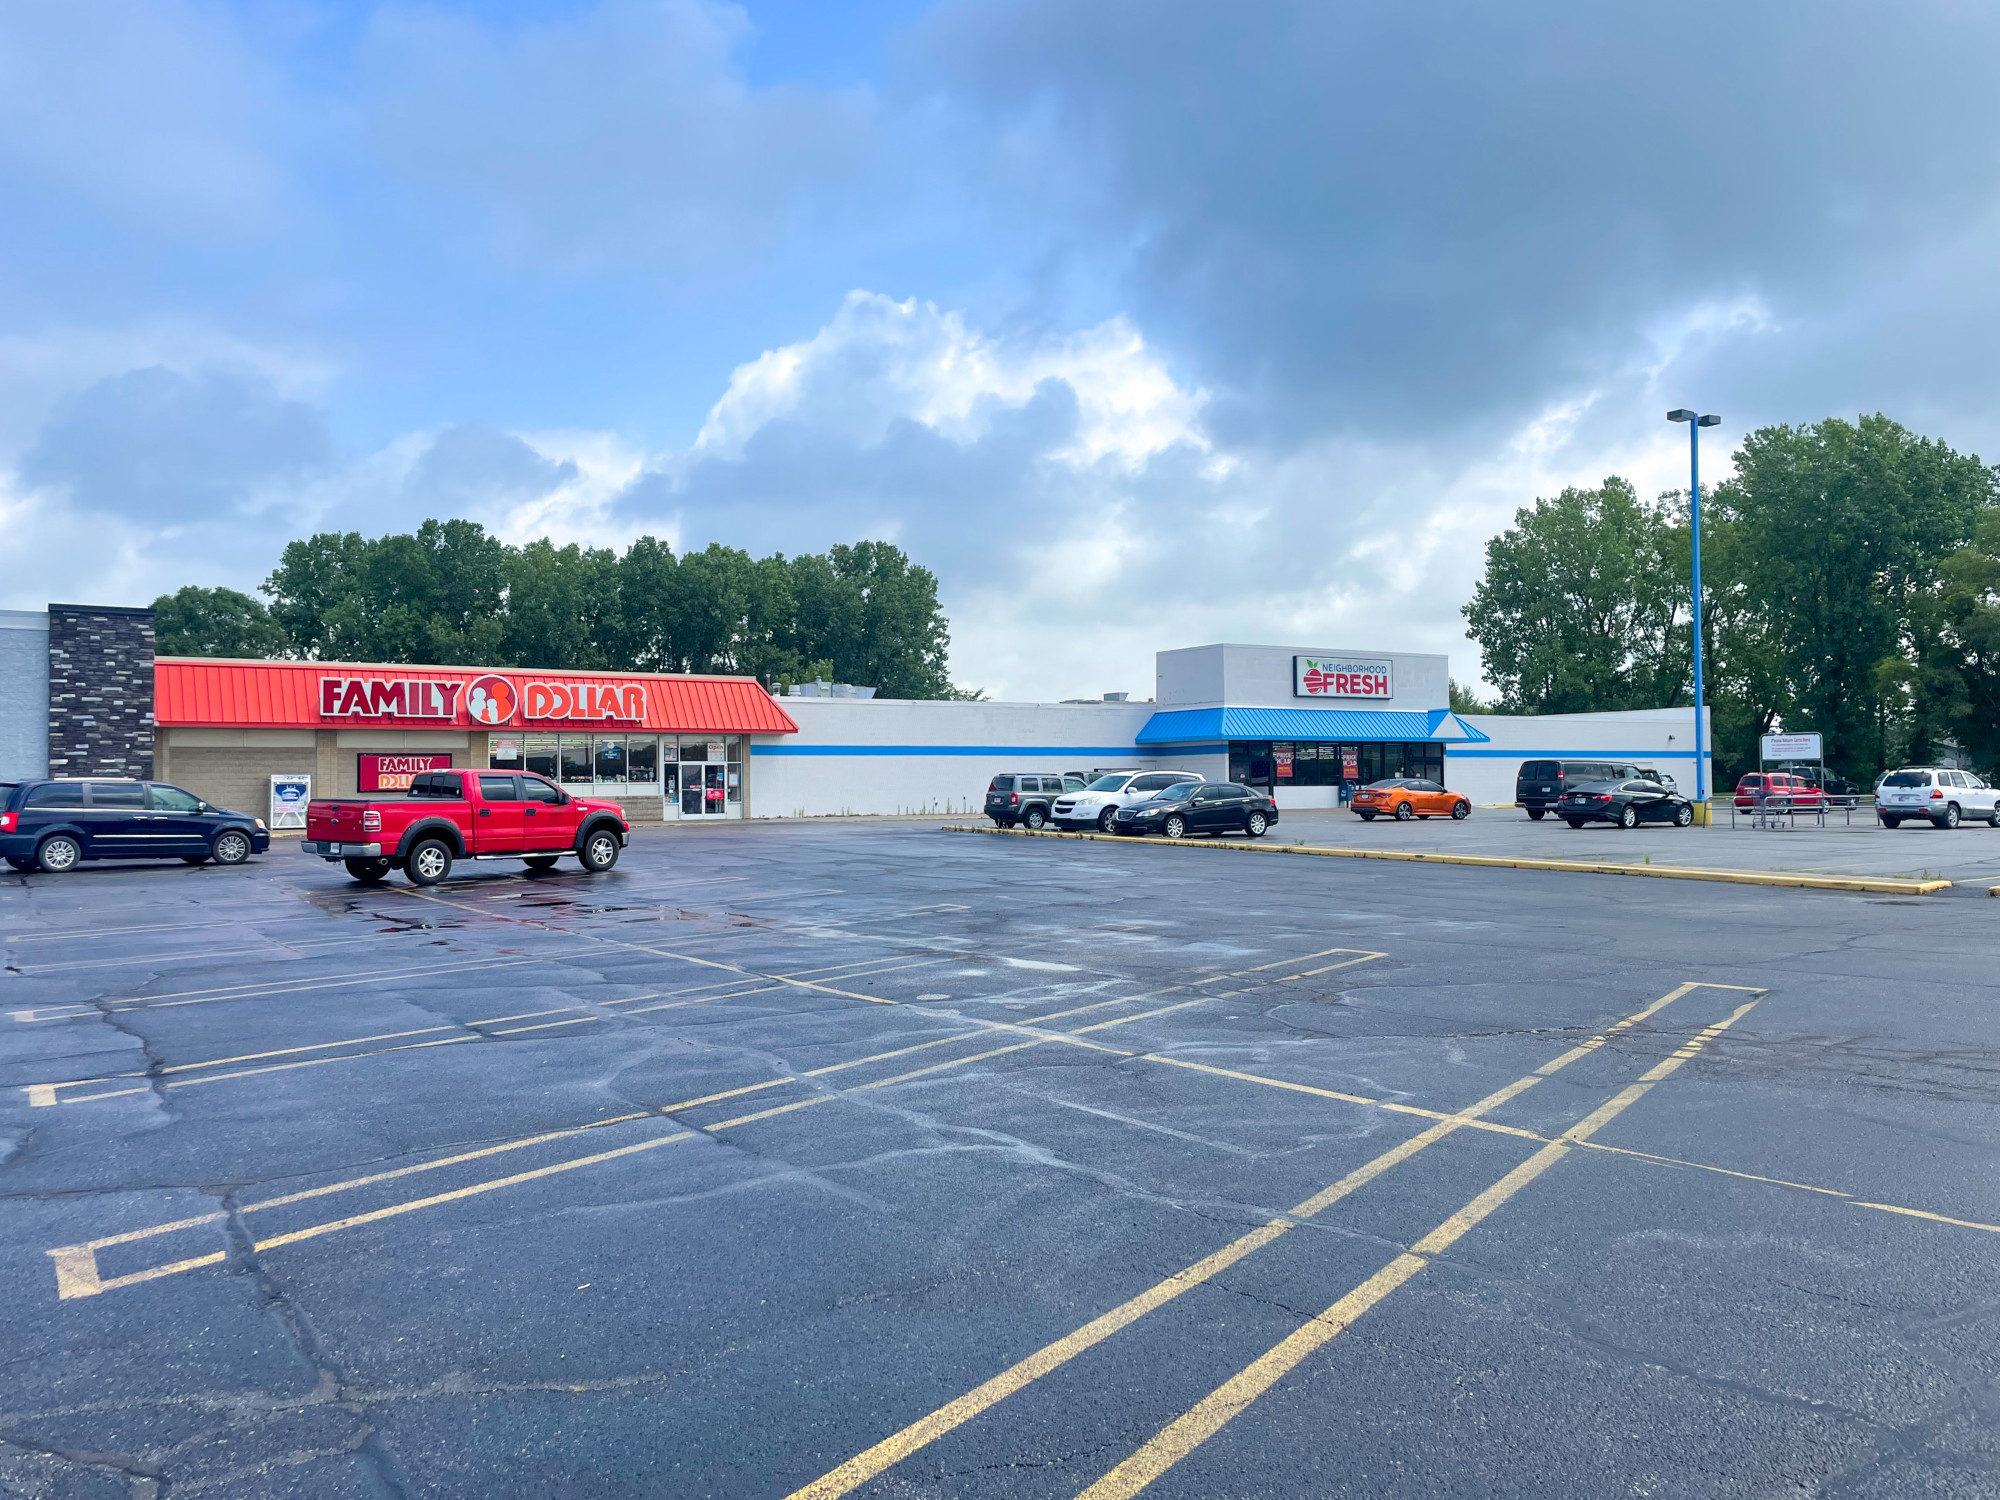 Sturges Property Group - 1023 E Main St, Gas City IN Family Dollar